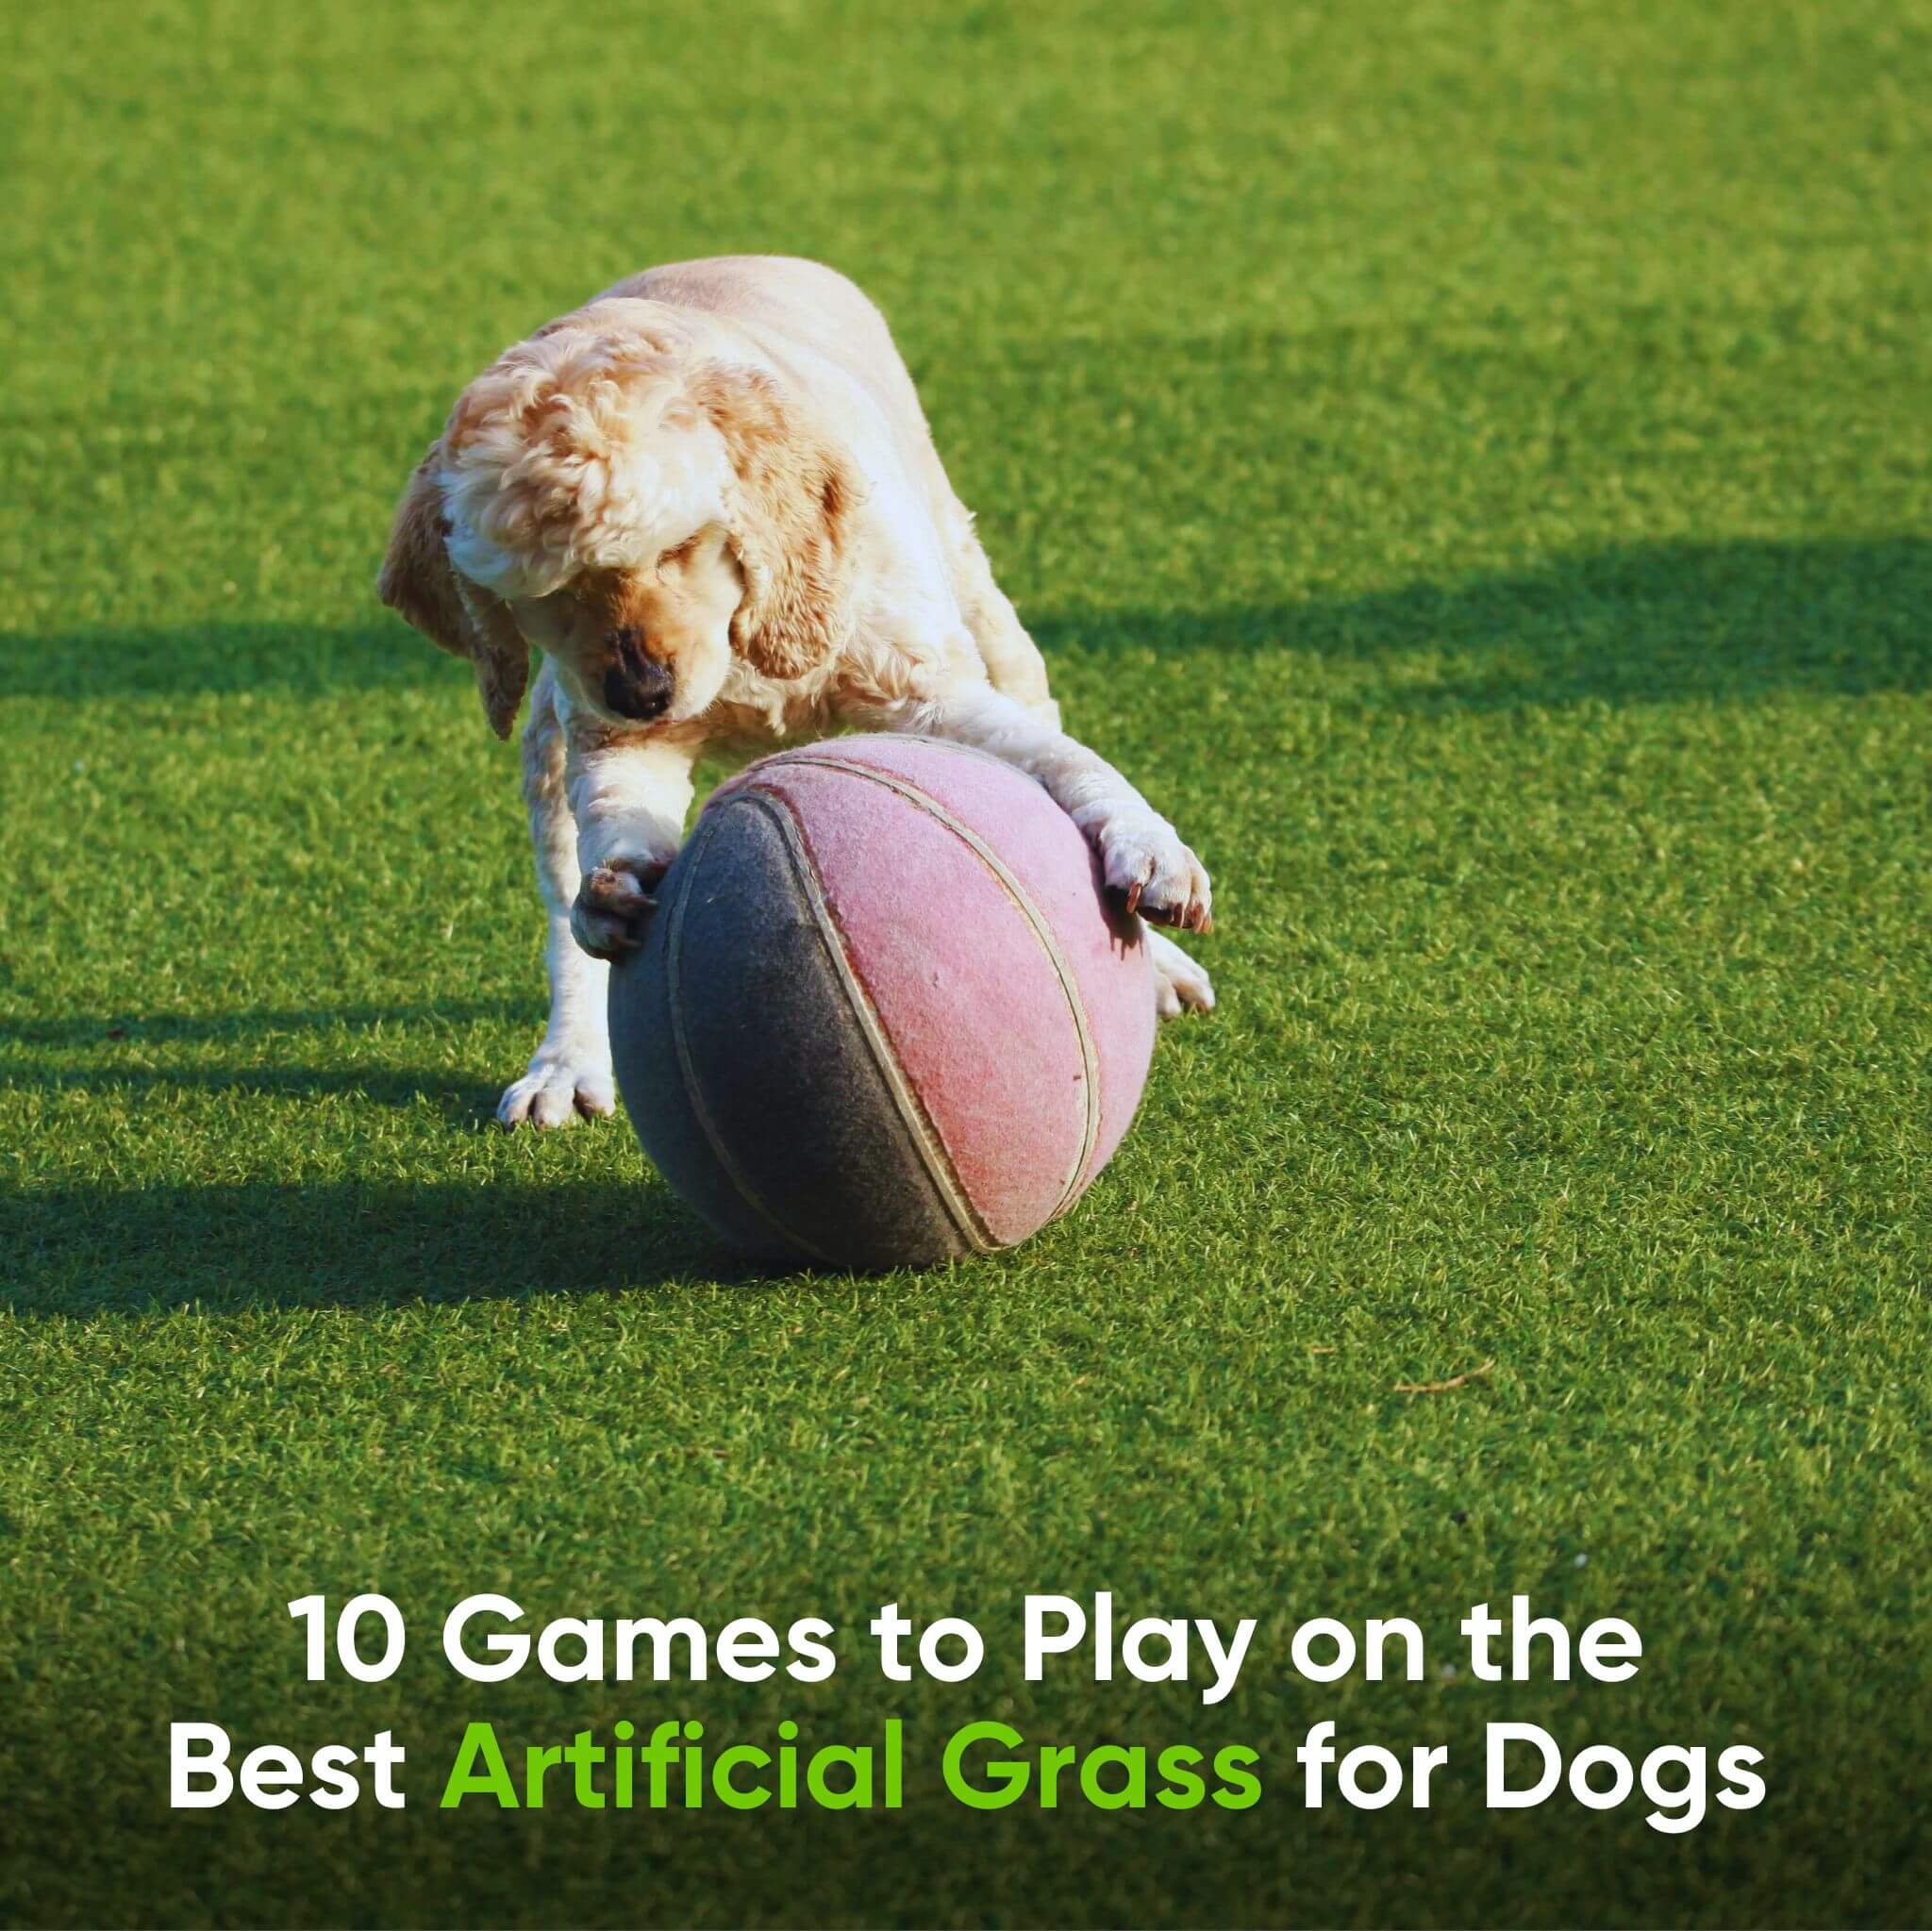 10 Games to Play on the Best Artificial Grass for Dogs - las vegas-min